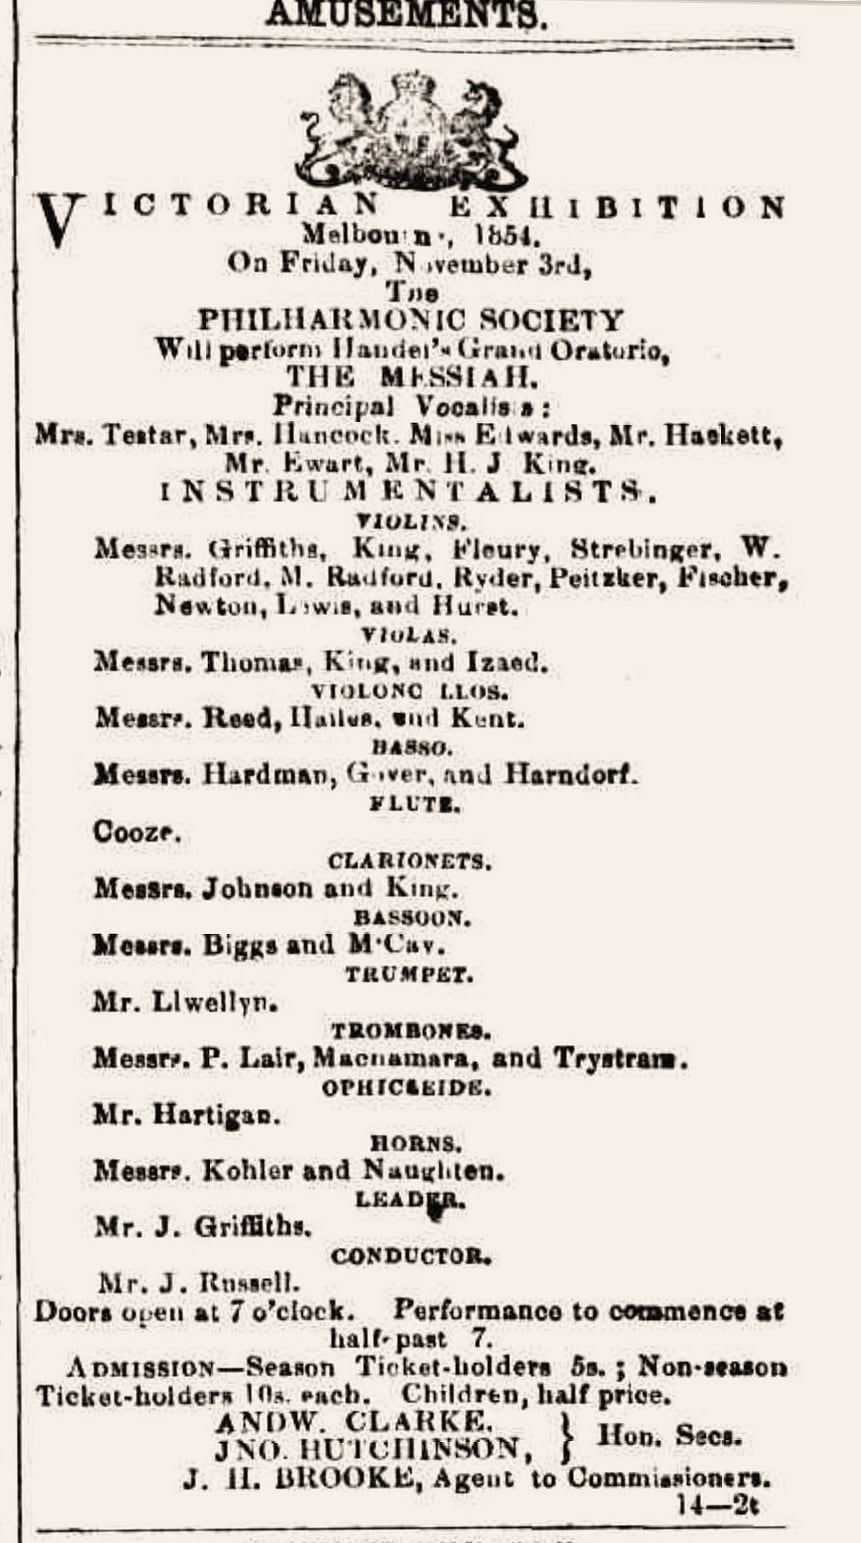 [Advertisement], The Age [Melbourne, VIC] (2 November 1854), 1